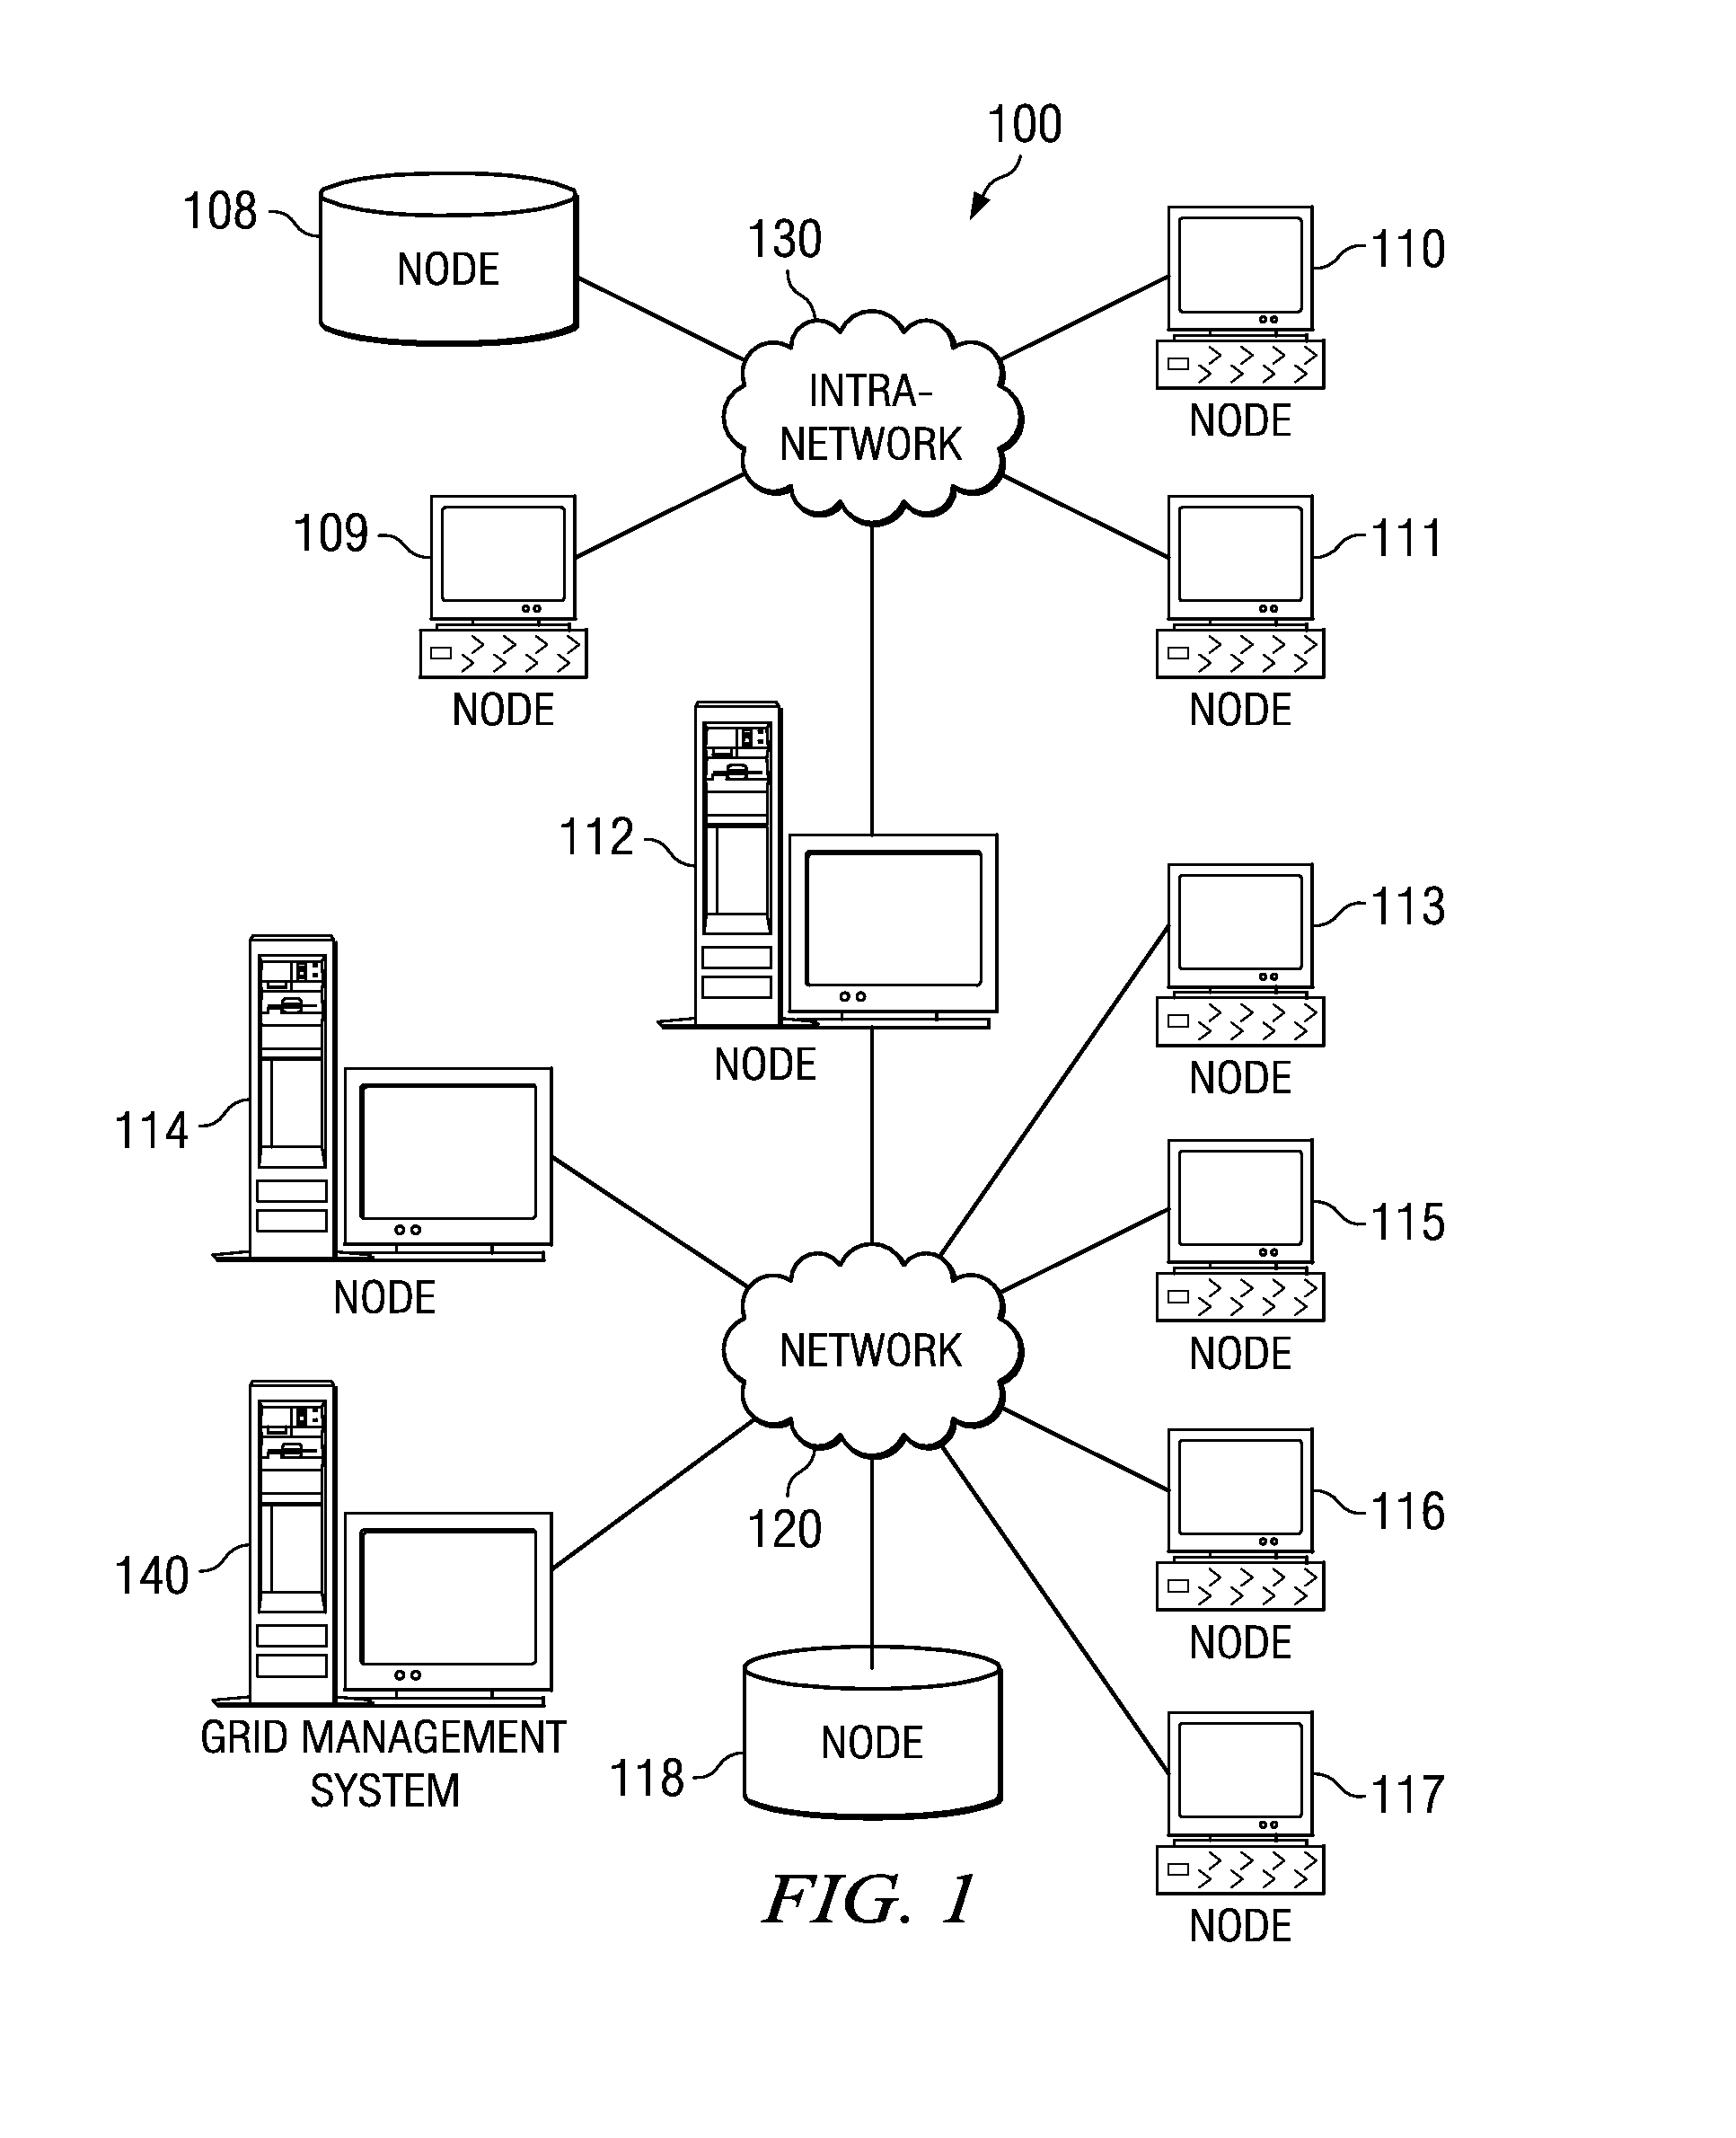 Method and Apparatus for Scheduling Grid Jobs Using a Dynamic Grid Scheduling Policy